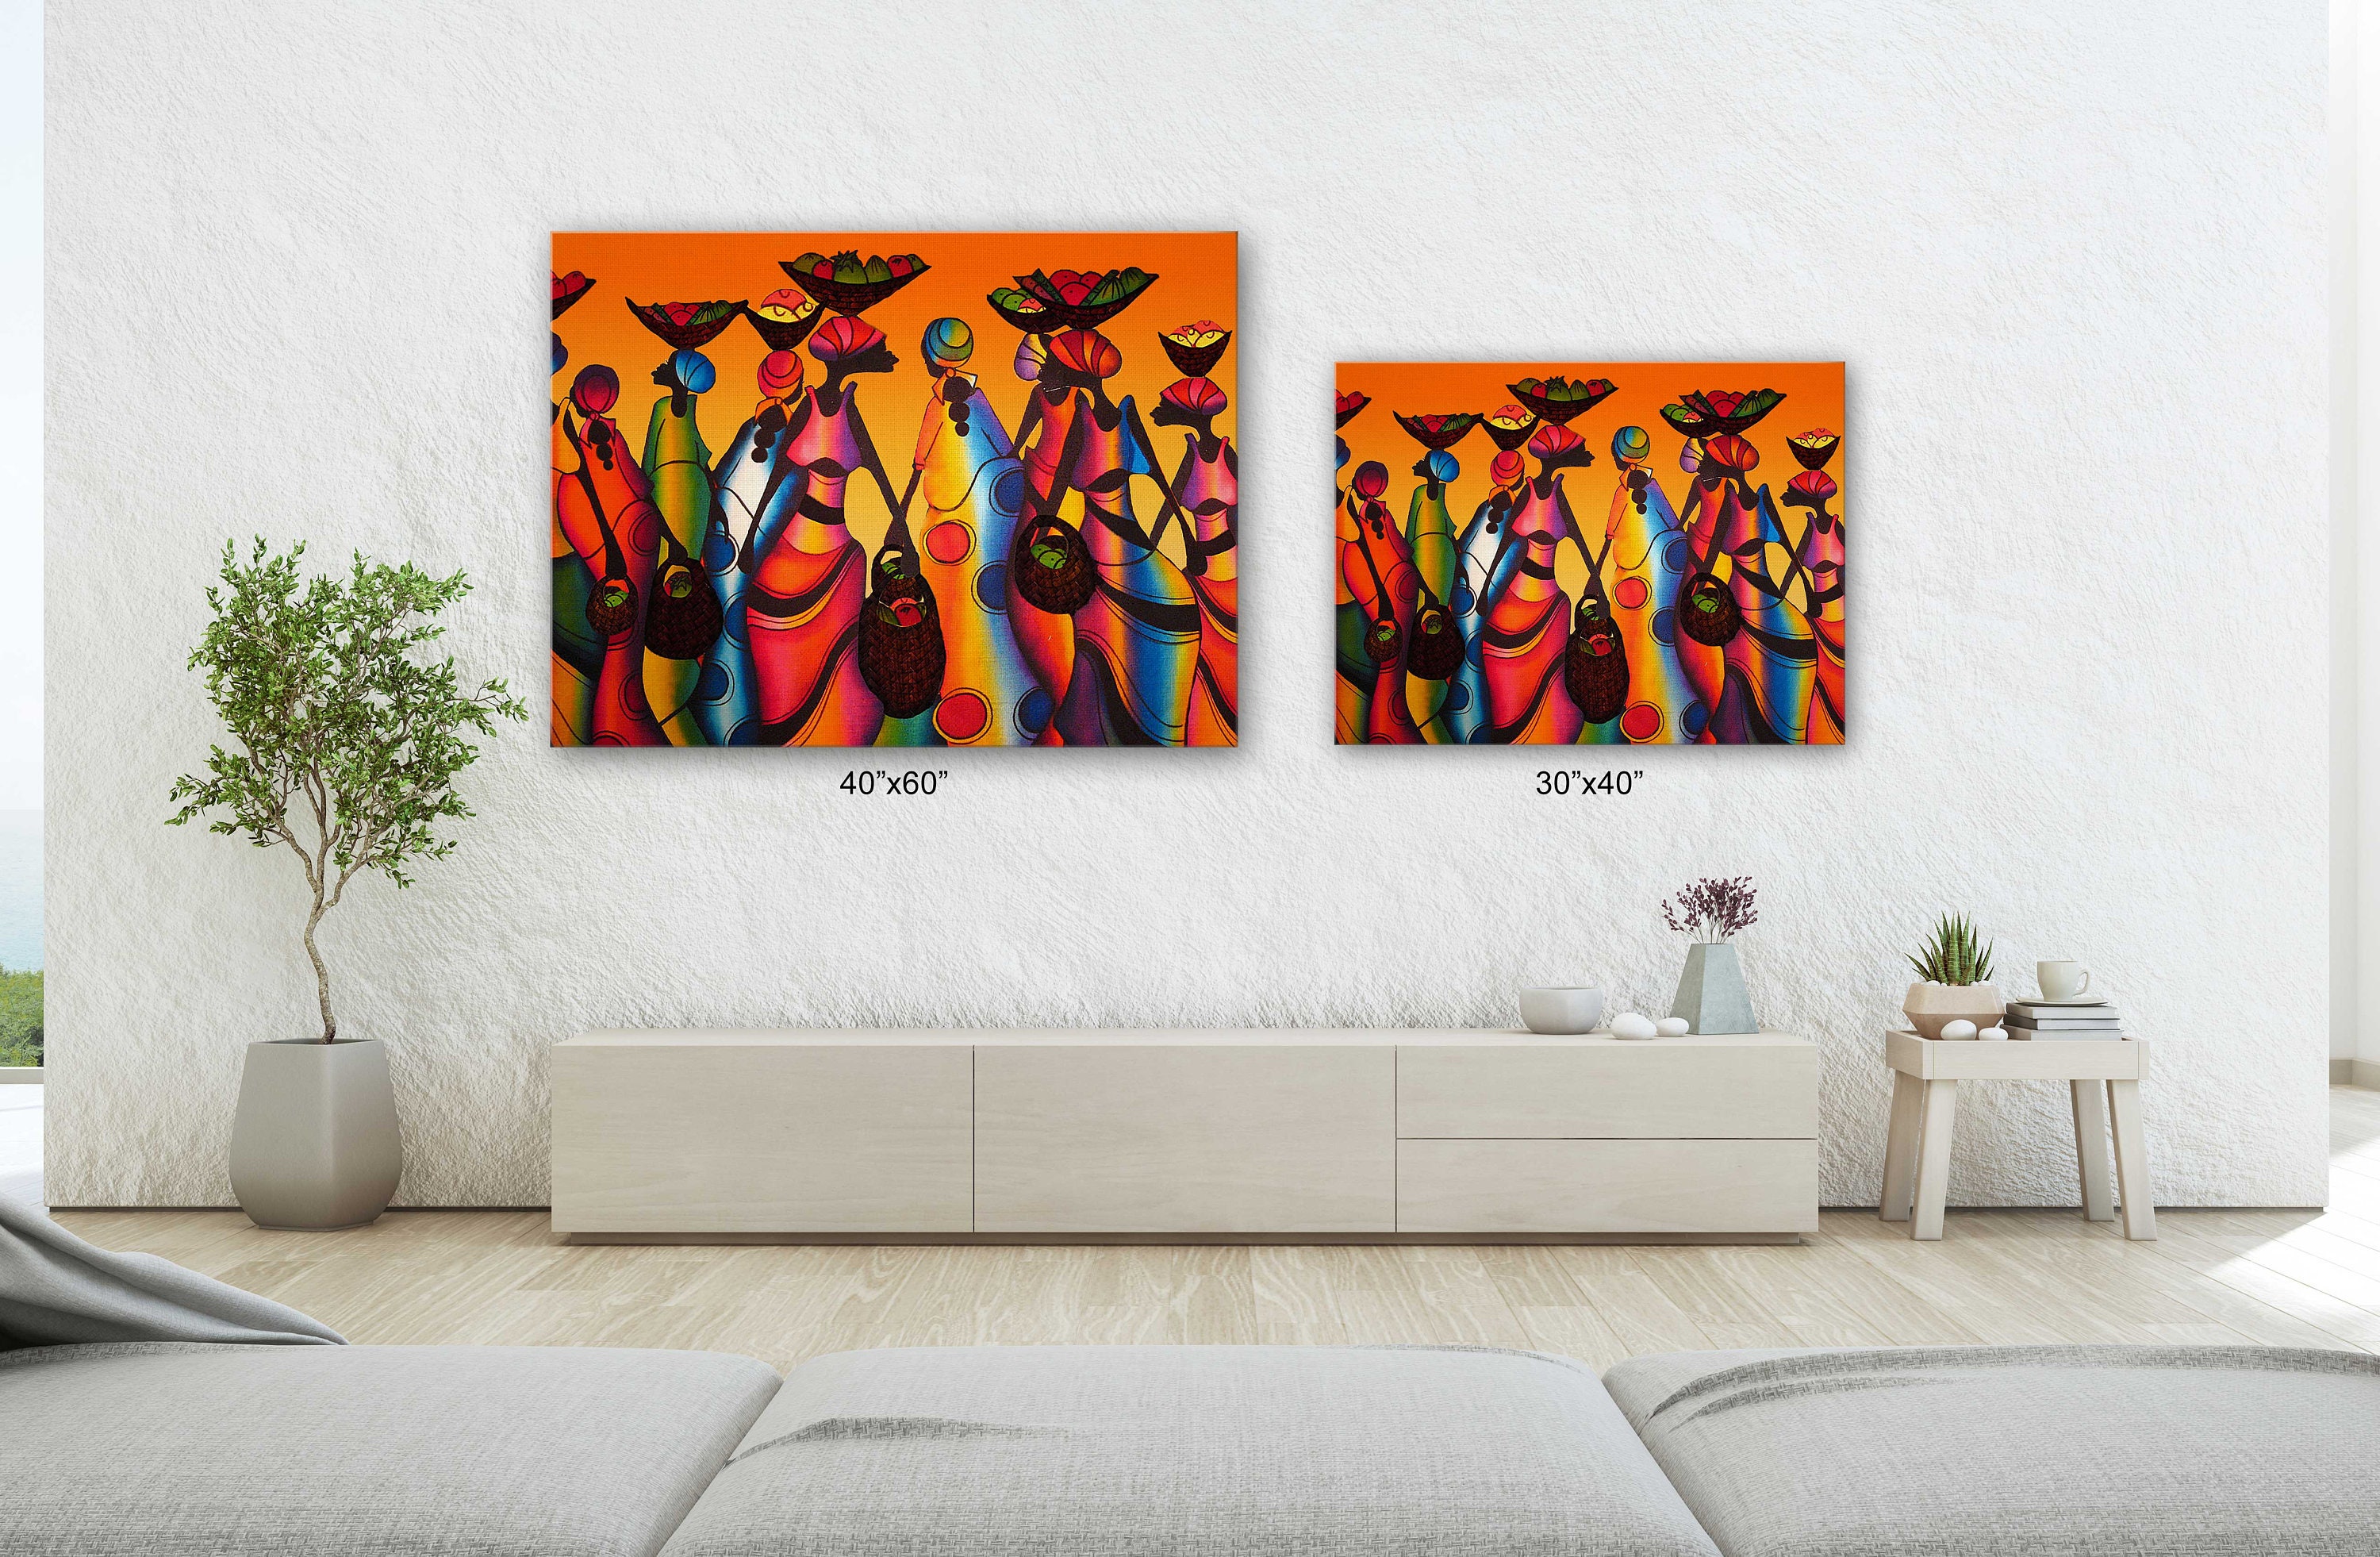 EE_ 3 PCS ABSTRACT AFRICAN WOMEN CANVAS WALL PAINTING POSTER ART HOME DECOR FADD 